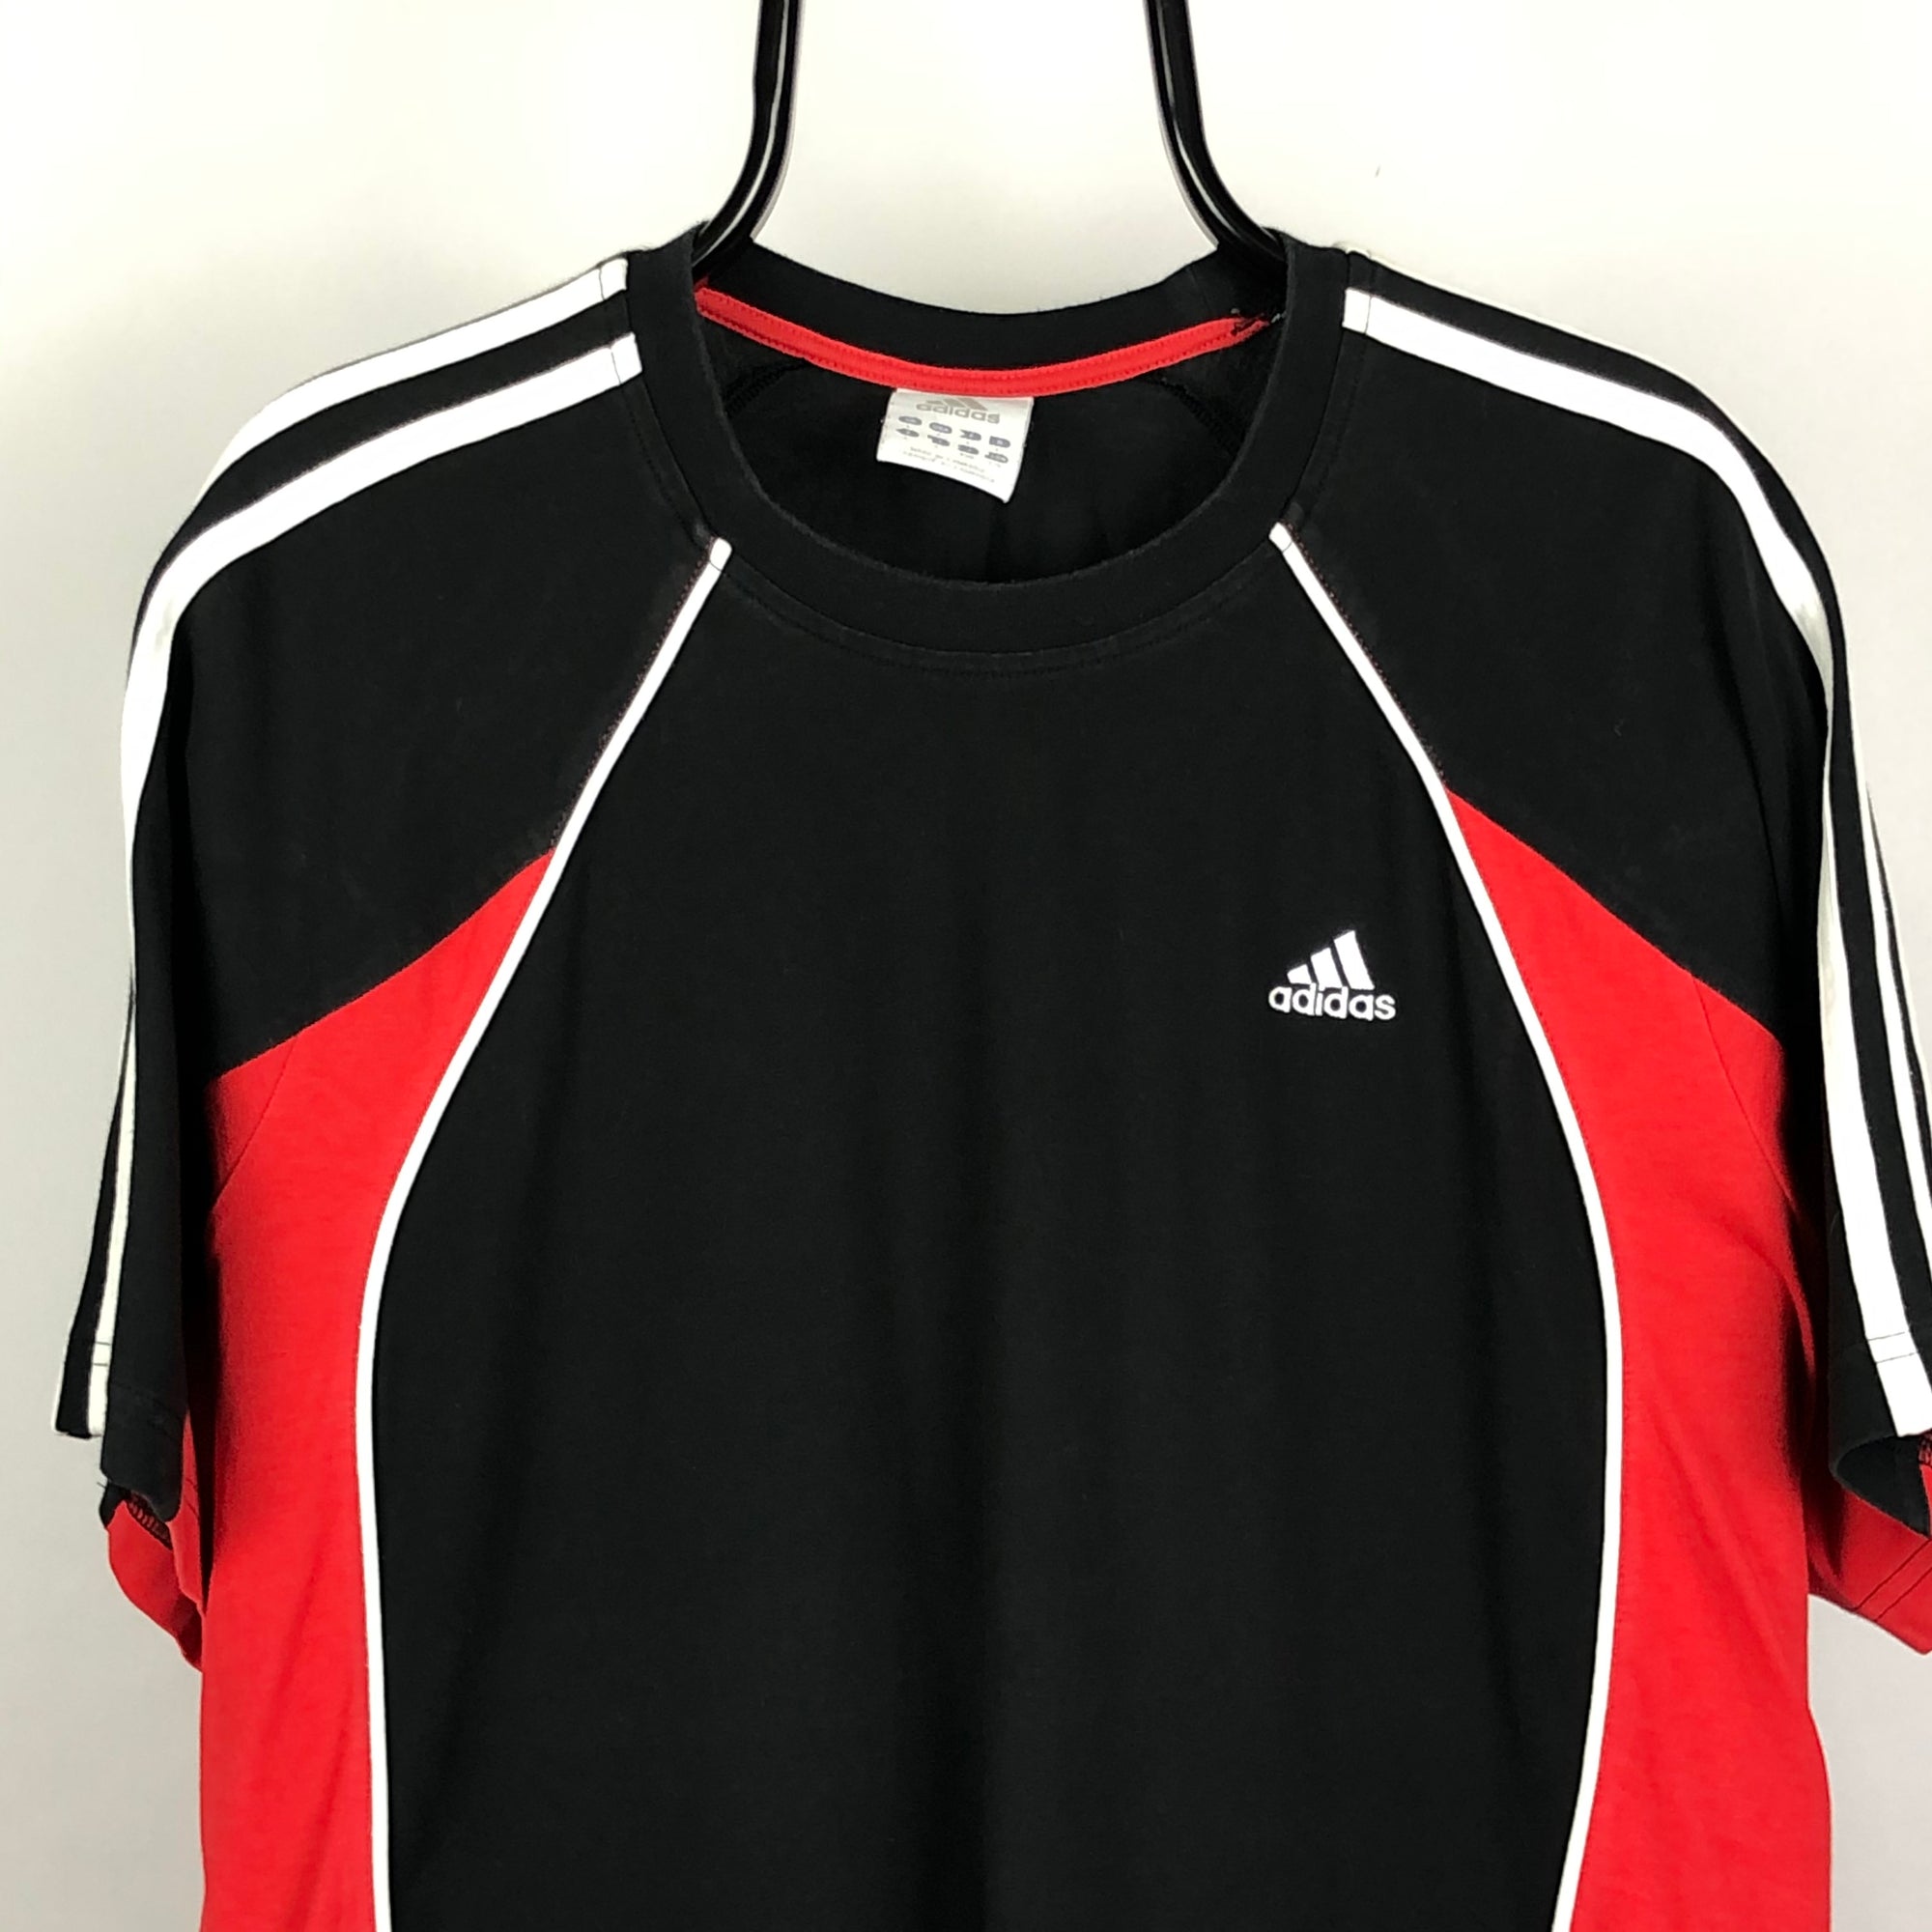 Vintage Adidas Embroidered Small Logo Tee in Black/Red/White - Men's Large/Women's XL